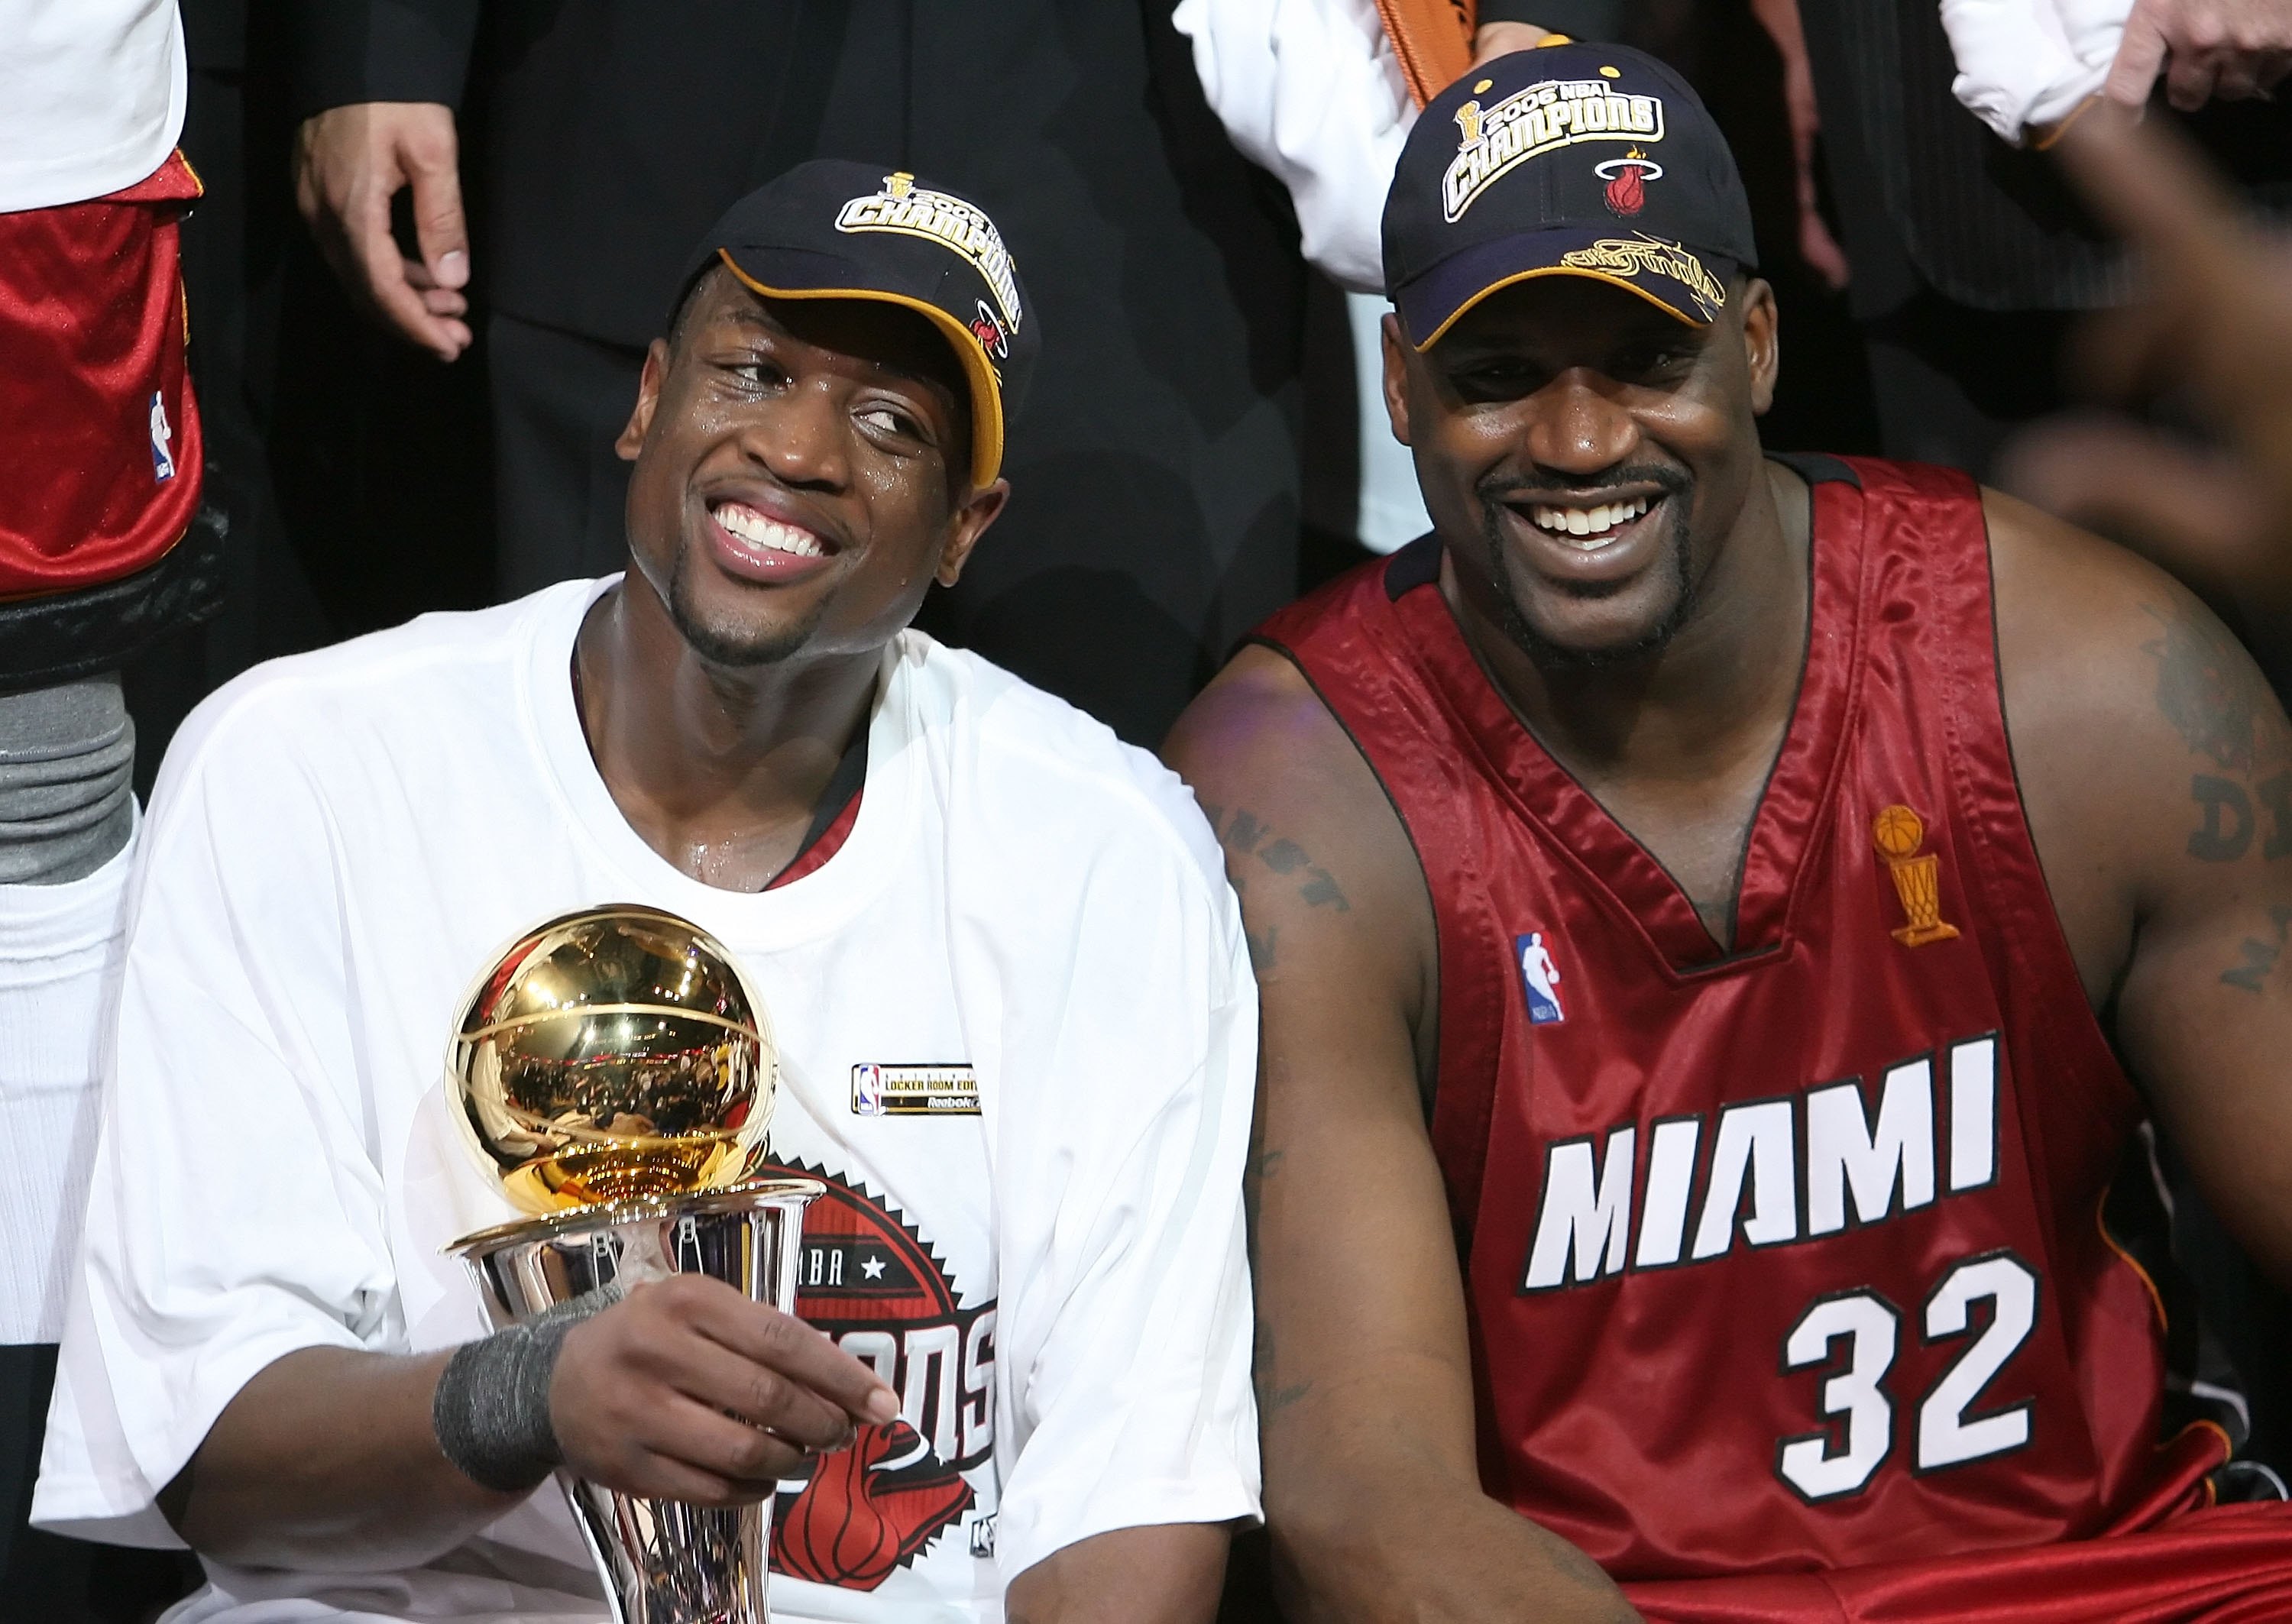 Dwyane Wade Talks About His Free Throws in 2006 NBA Finals